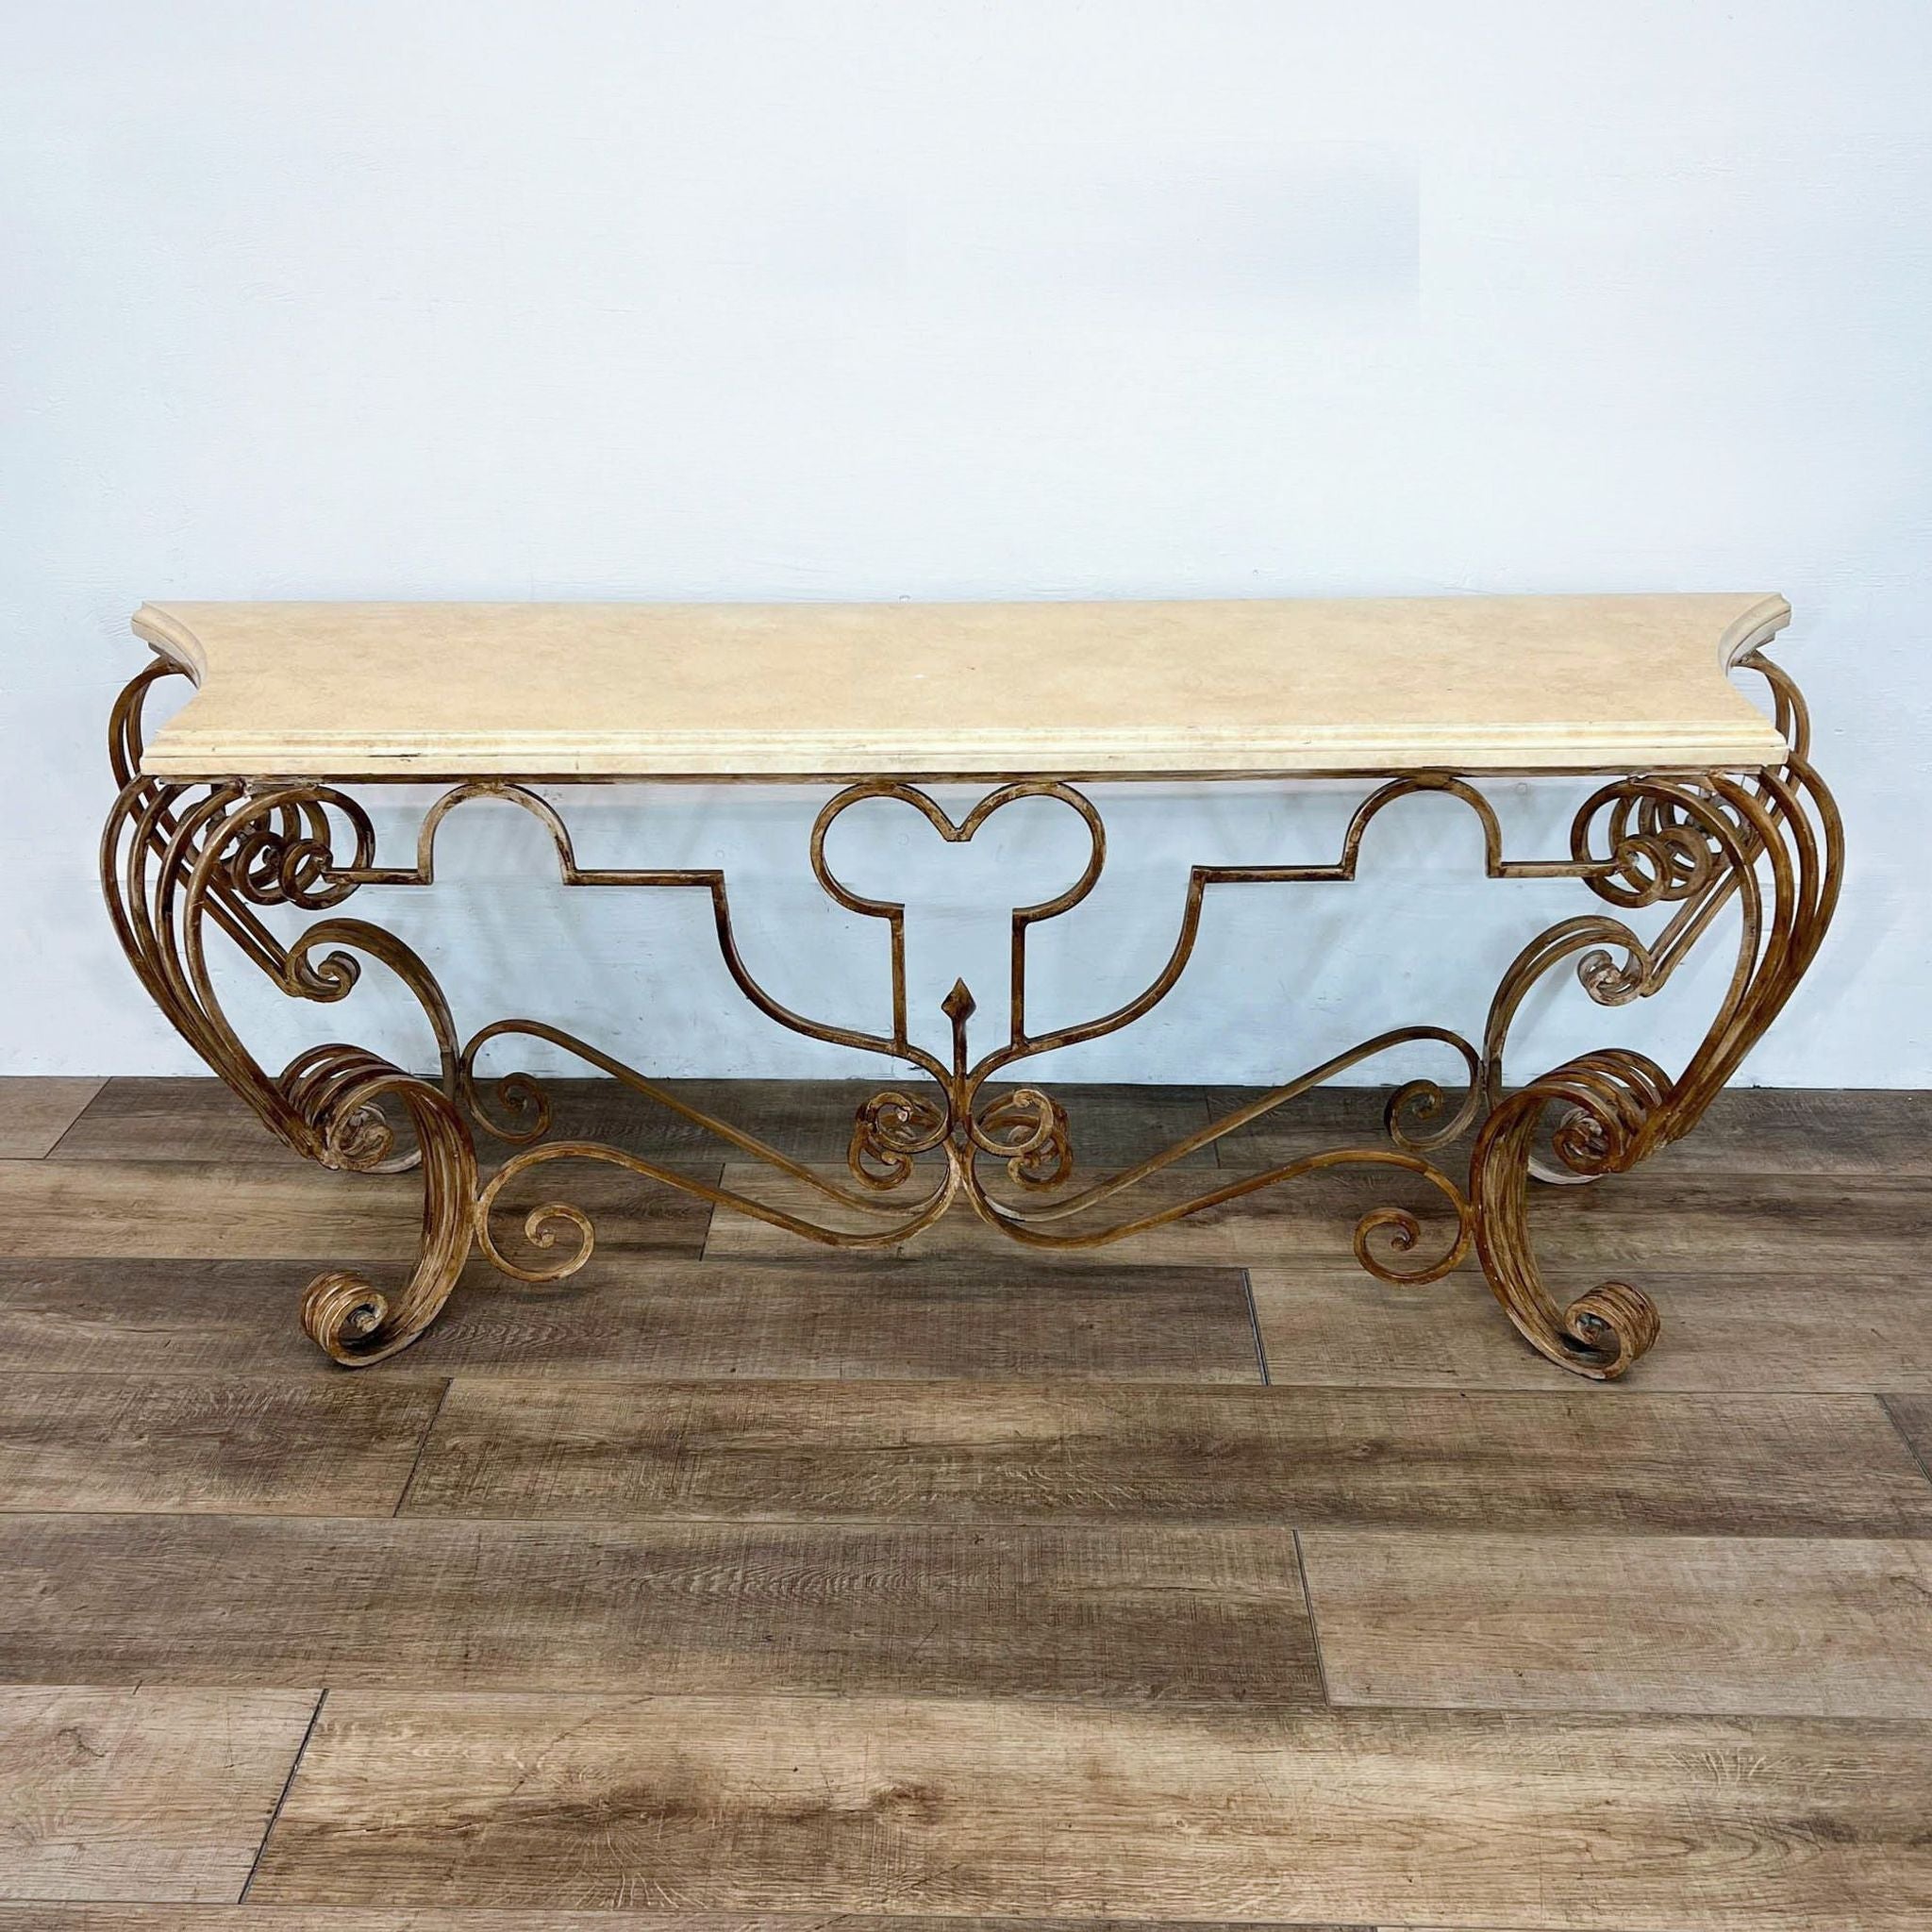 Reperch brand elegant console table with ornate gold-colored metal legs and a cream marble top.